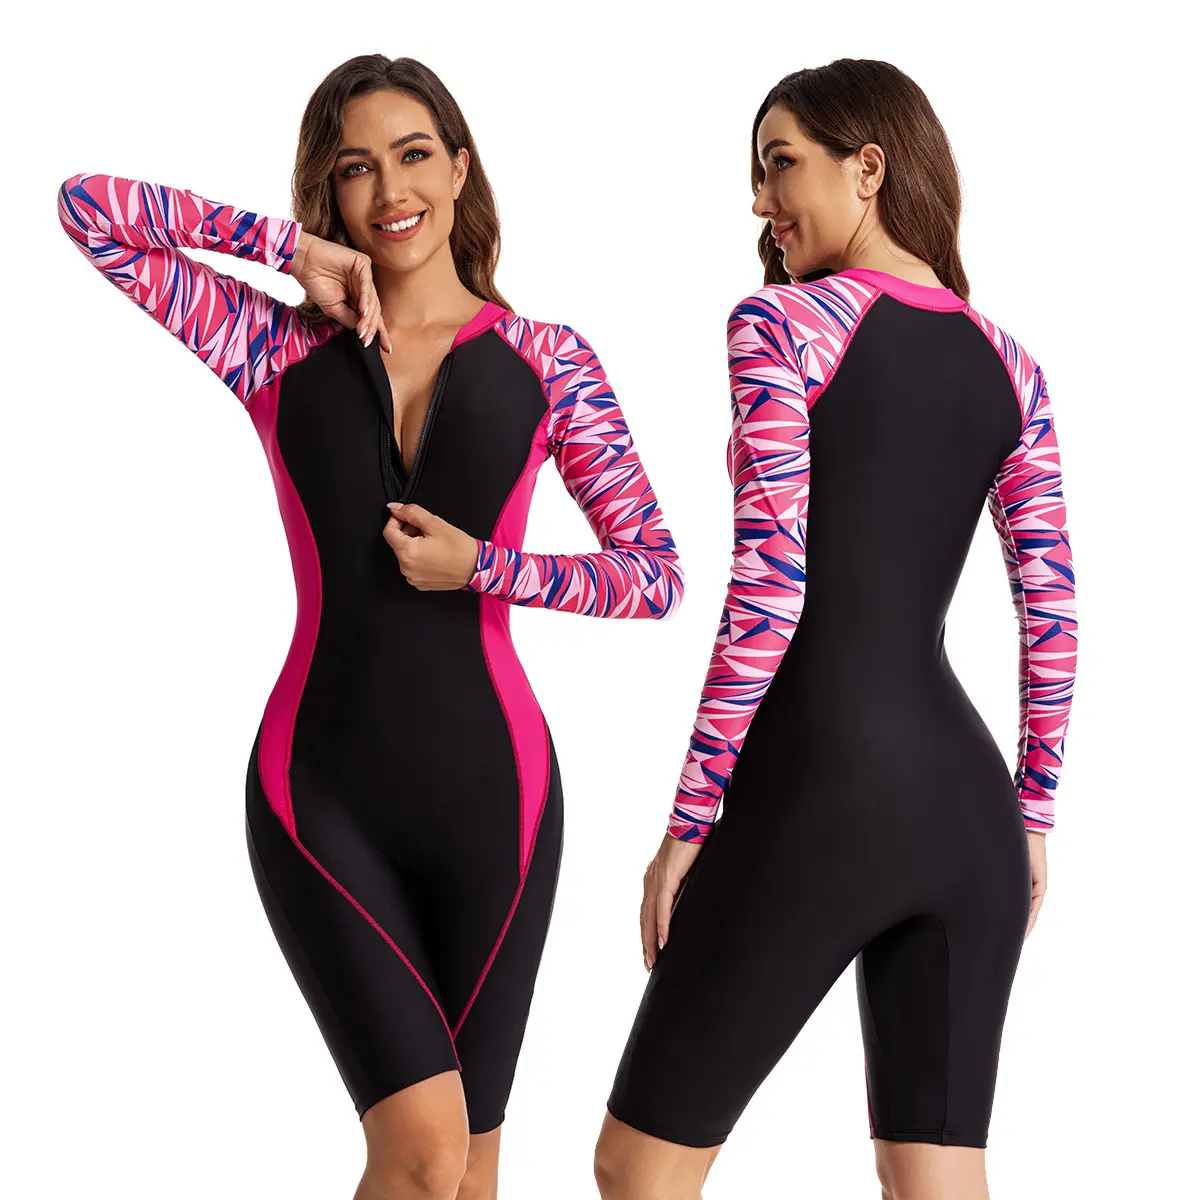 Customized Women Beautiful Pink Sublimation Printed Long Sleeves Rash Guards Style Swimsuits Anti-UV Lycra Bathing Surfing Suit